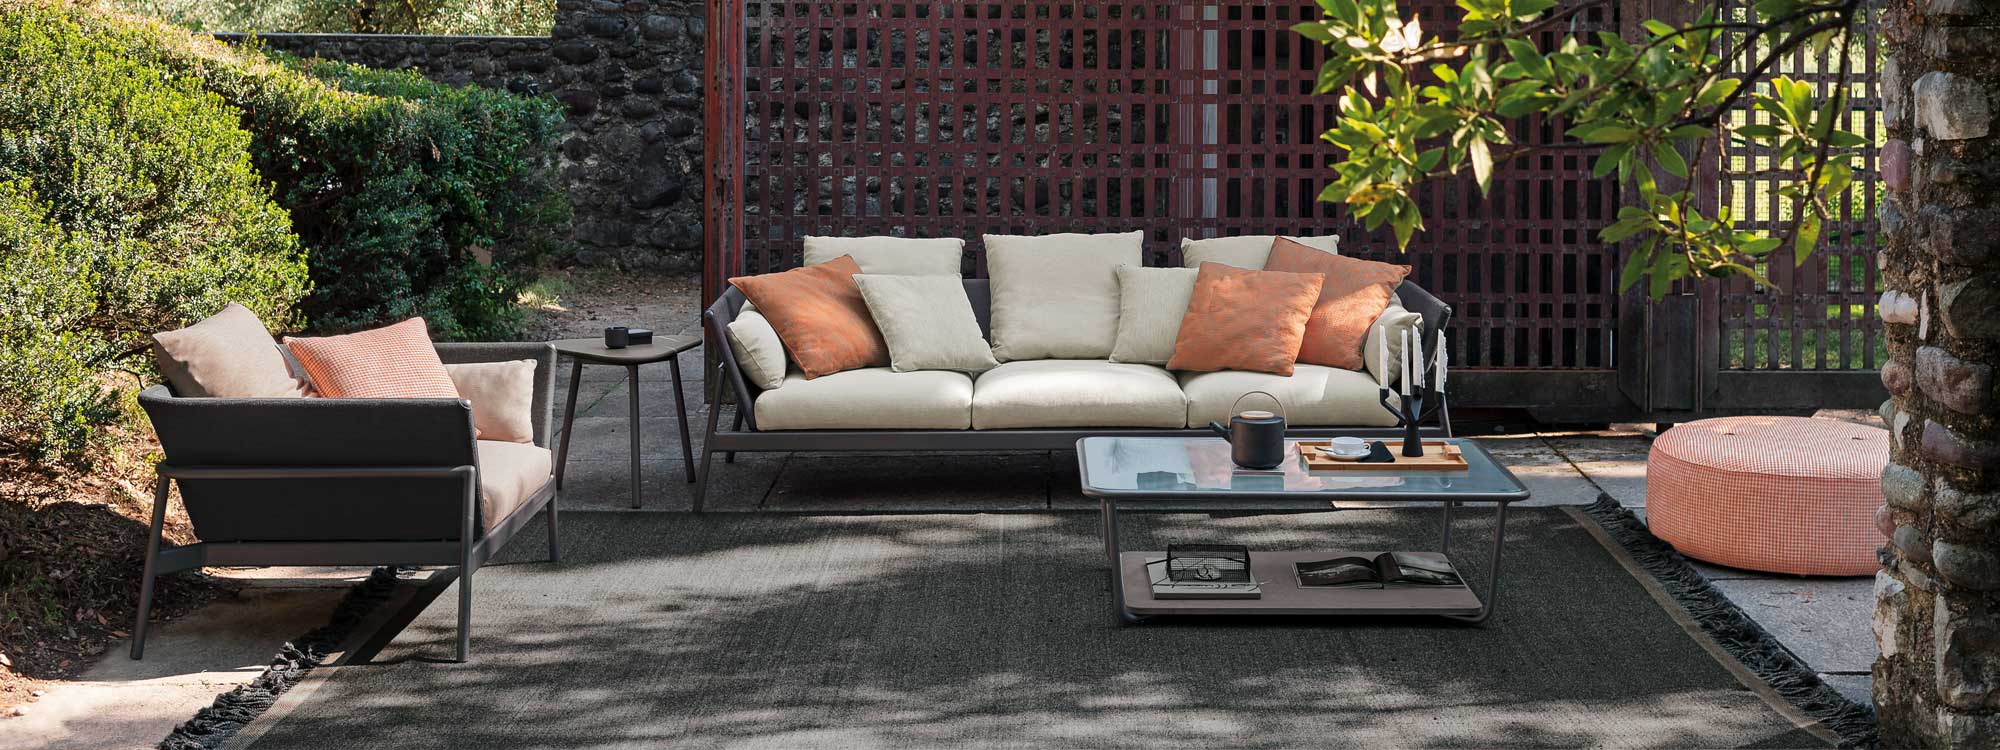 Image of RODA Piper garden sofa and lounge chair with Smoke-grey frame and cream and orange cushions